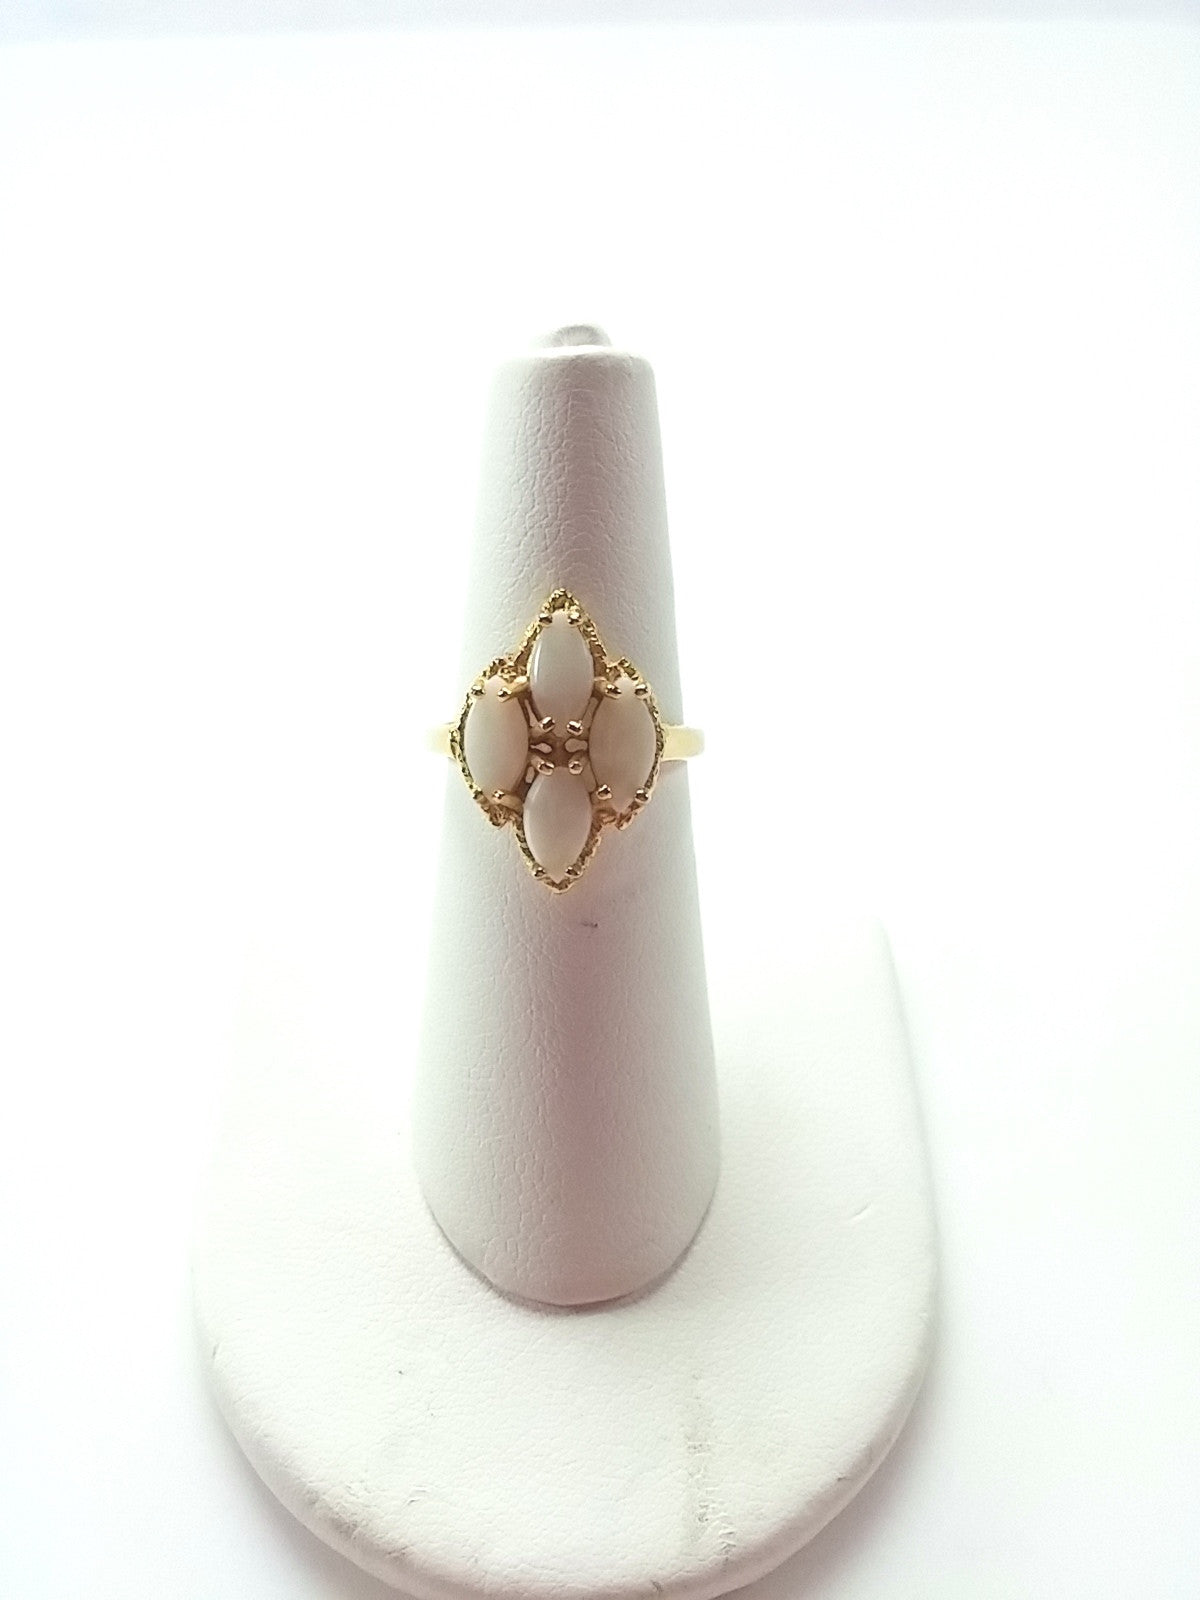 Vintage Ring 18KT HGE Gold Tone w/ White Stone Center Setting - Dirty 30 Vintage | Vintage Clothing, Vintage Jewelry, Vintage Accessories